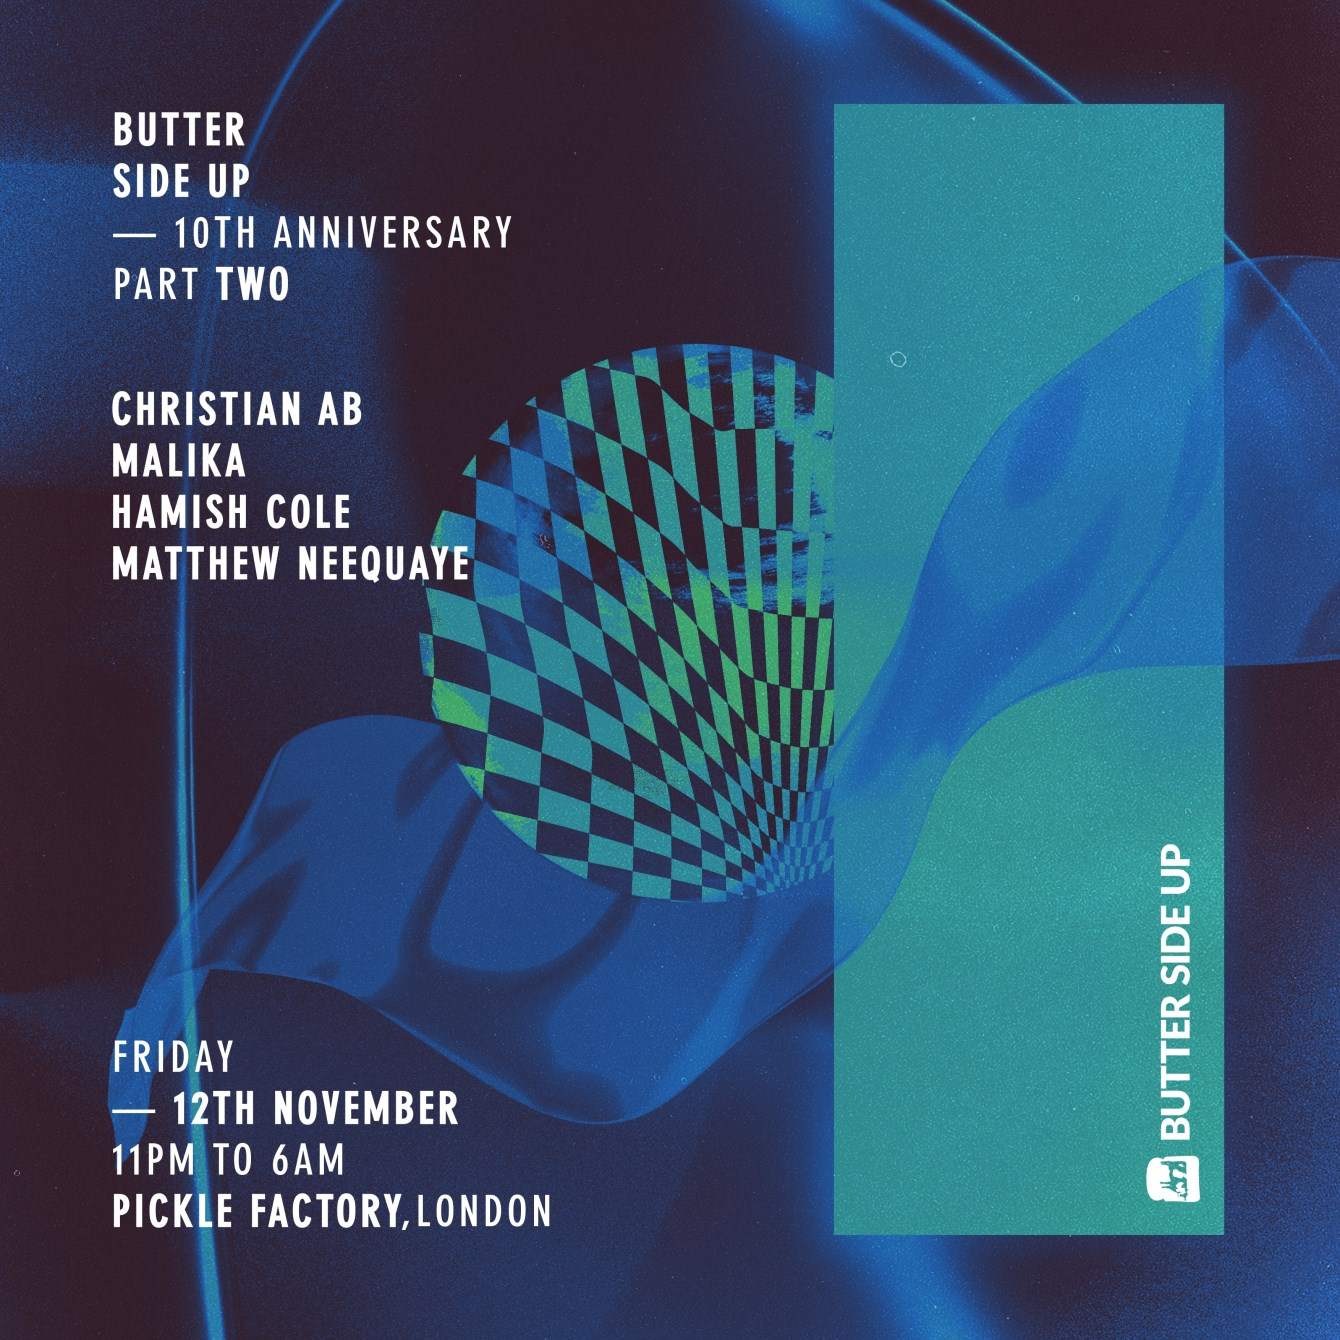 Butter Side Up 10th Birthday with Christian AB, Malika & More - Página frontal